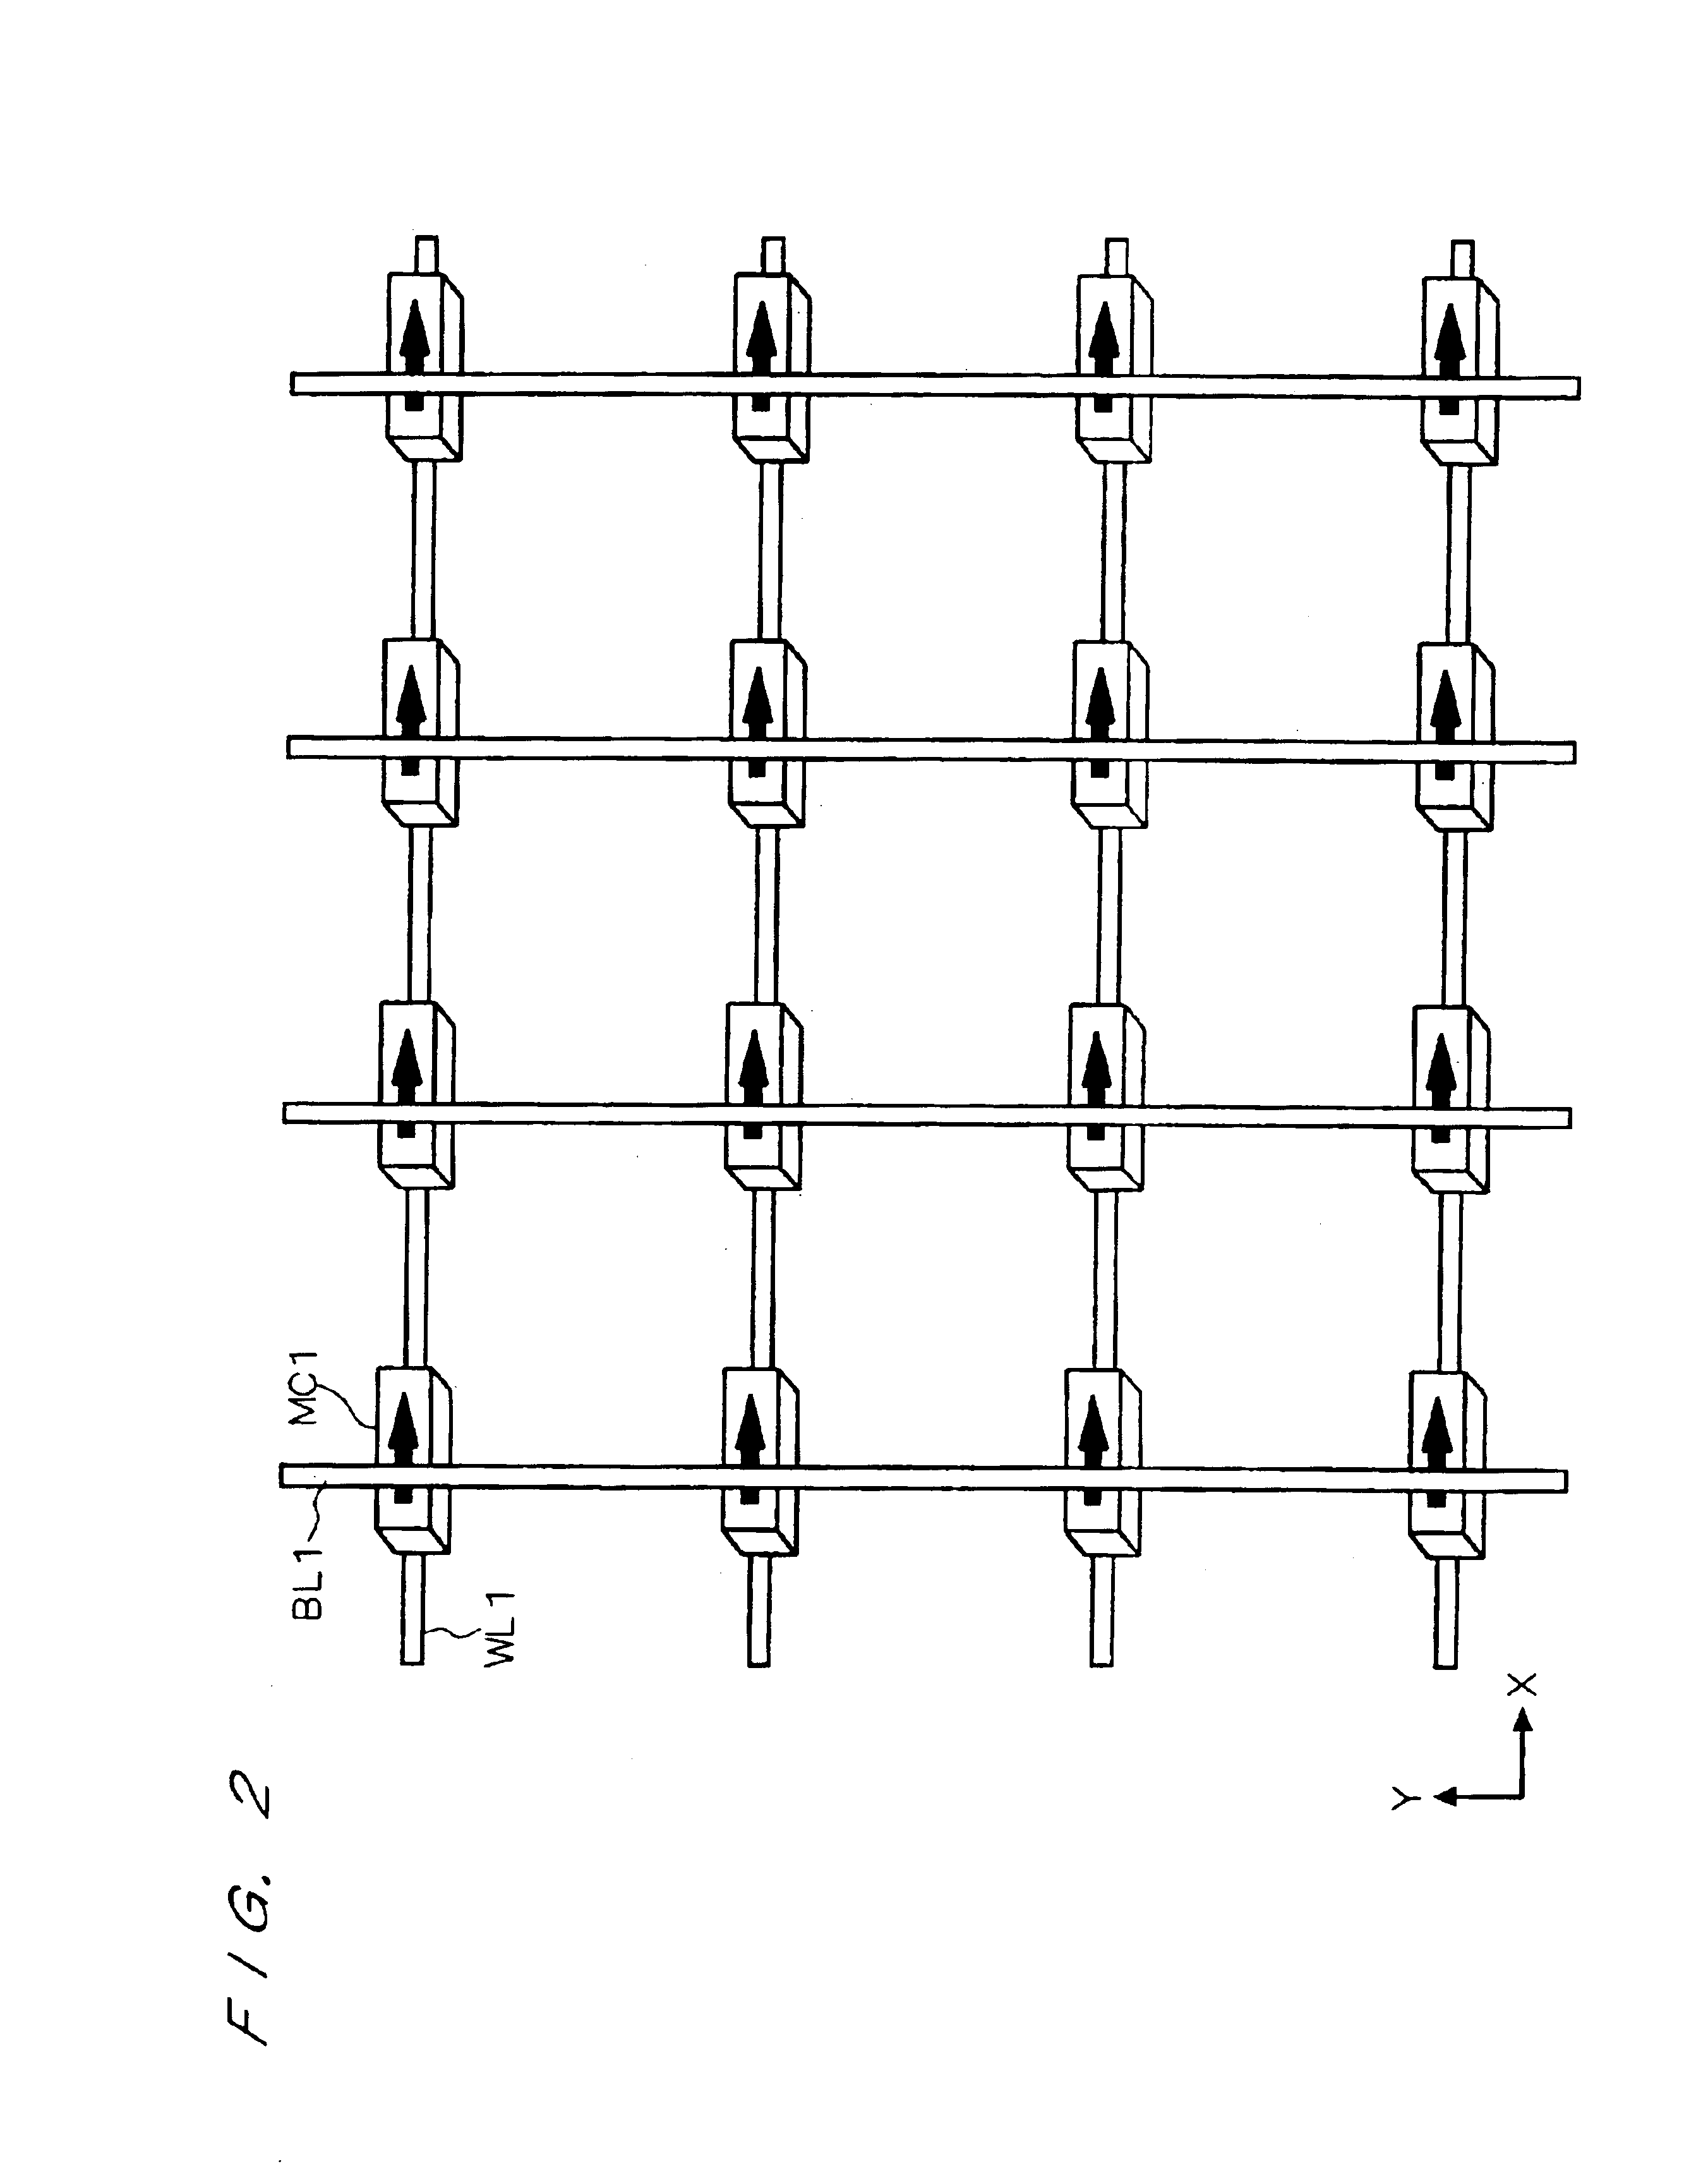 Magnetic memory device capable of passing bidirectional currents through the bit lines